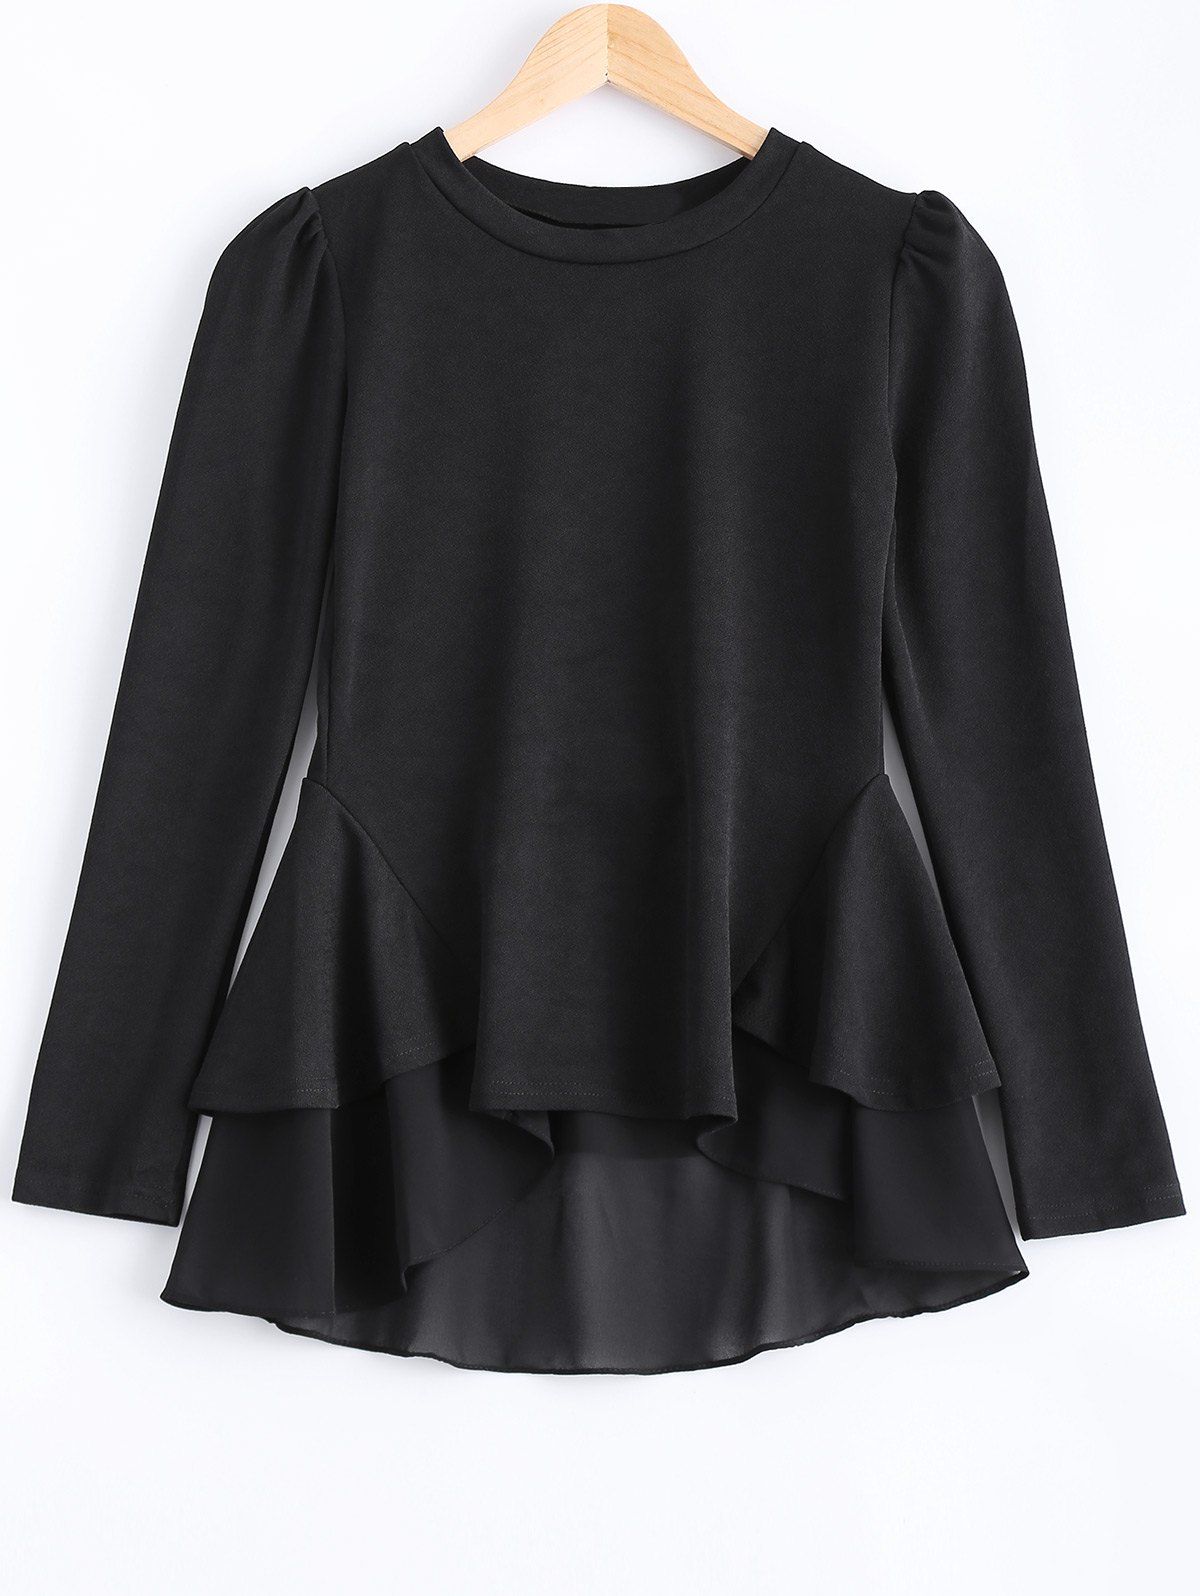 [41% OFF] 2021 Simple Pure Color Flounce Layered Top For Women In BLACK ...